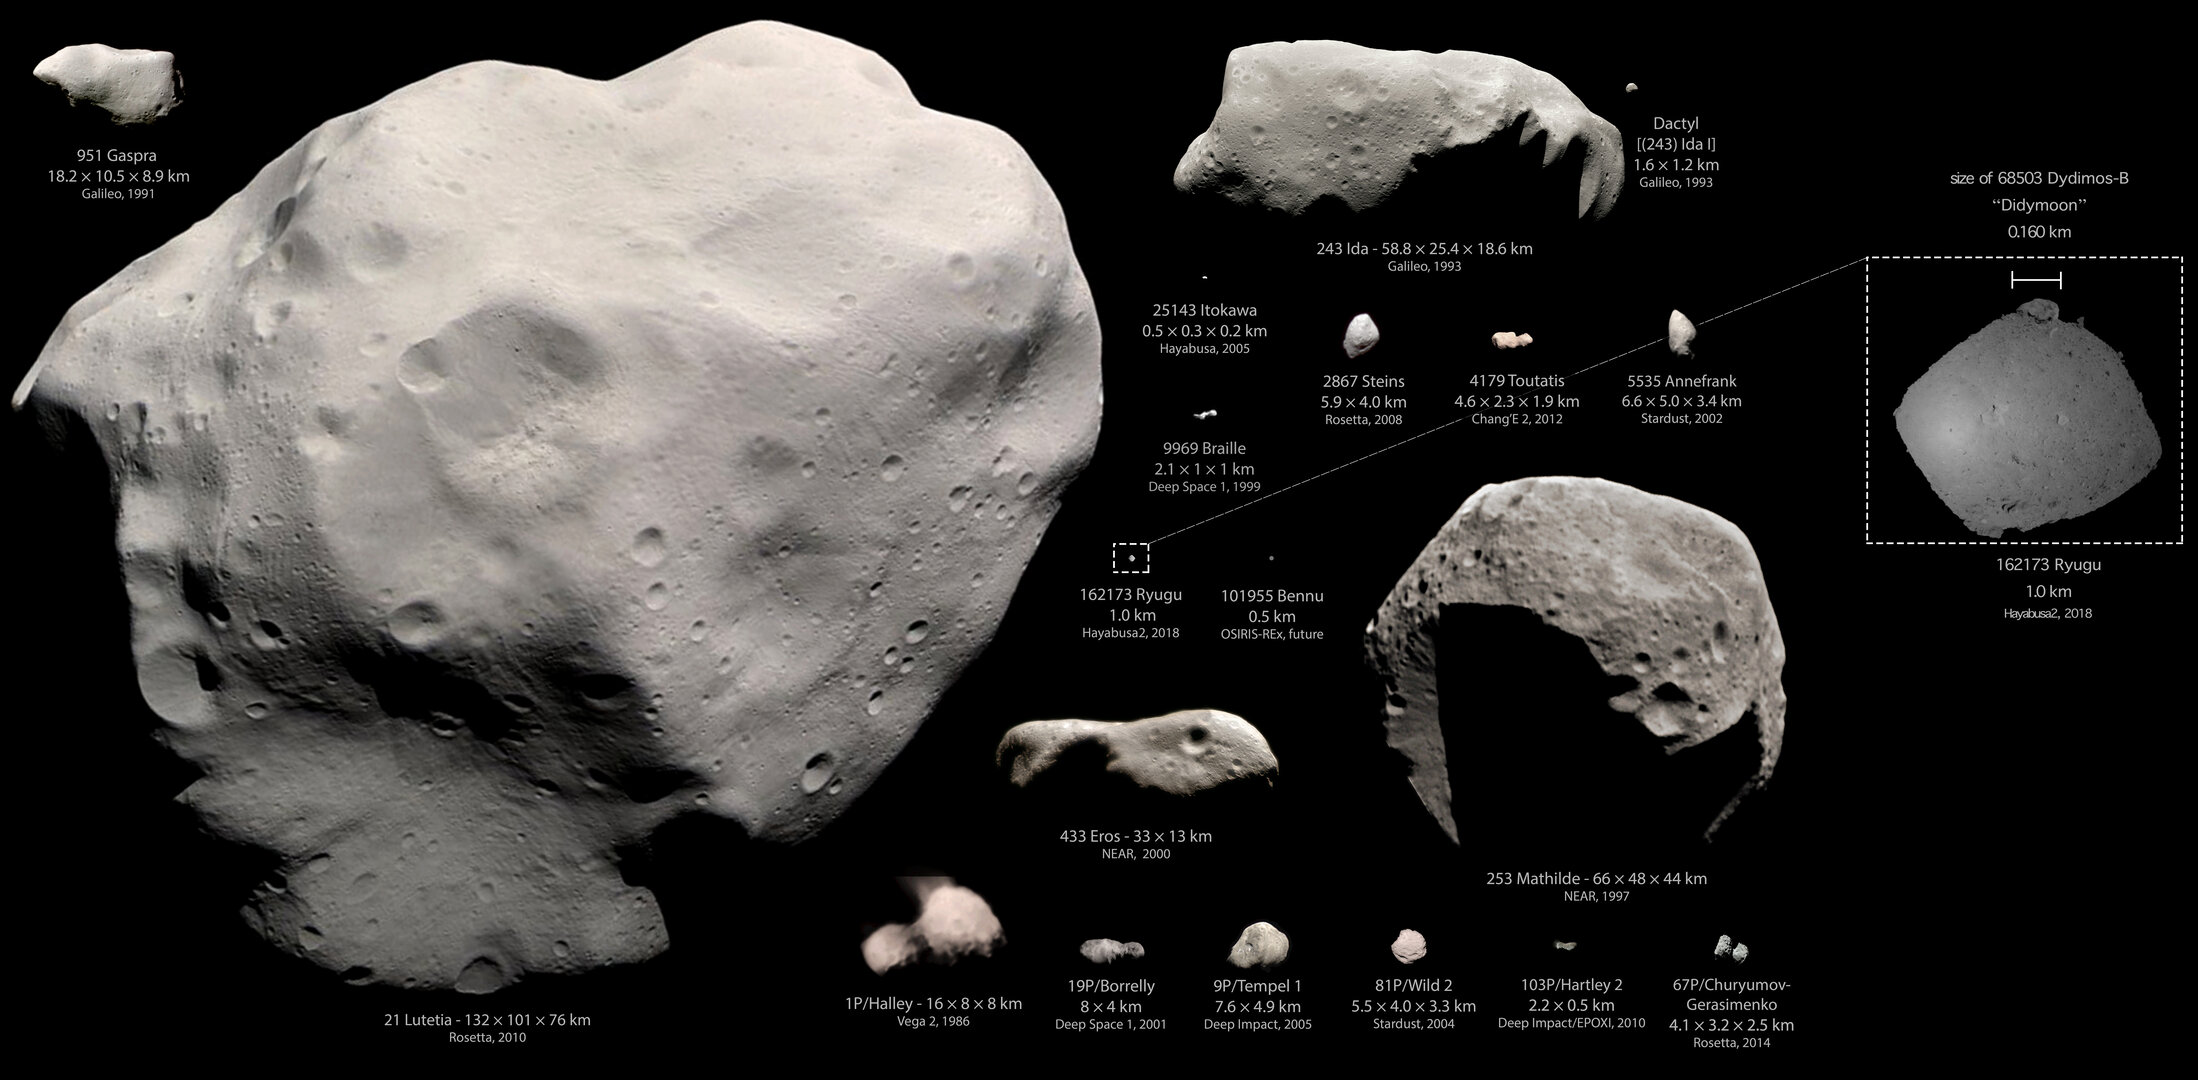 Asteroids compared to Didymoon